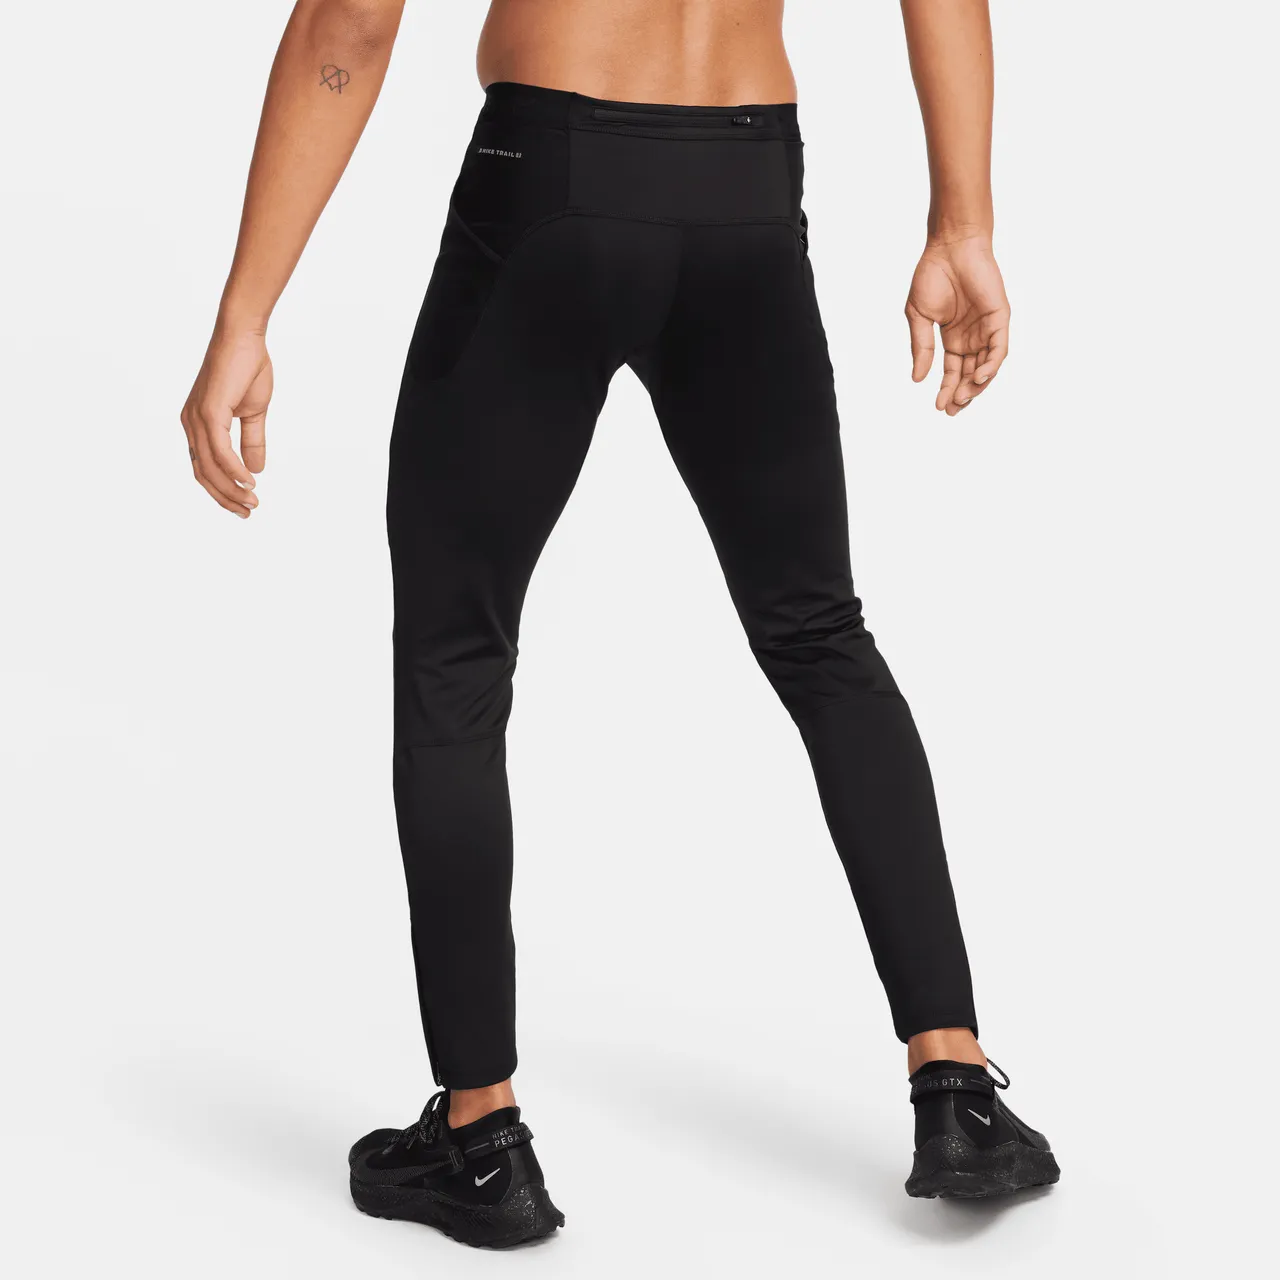 Nike Lunar Ray Men's Winterized Running Tights - Black - Polyester